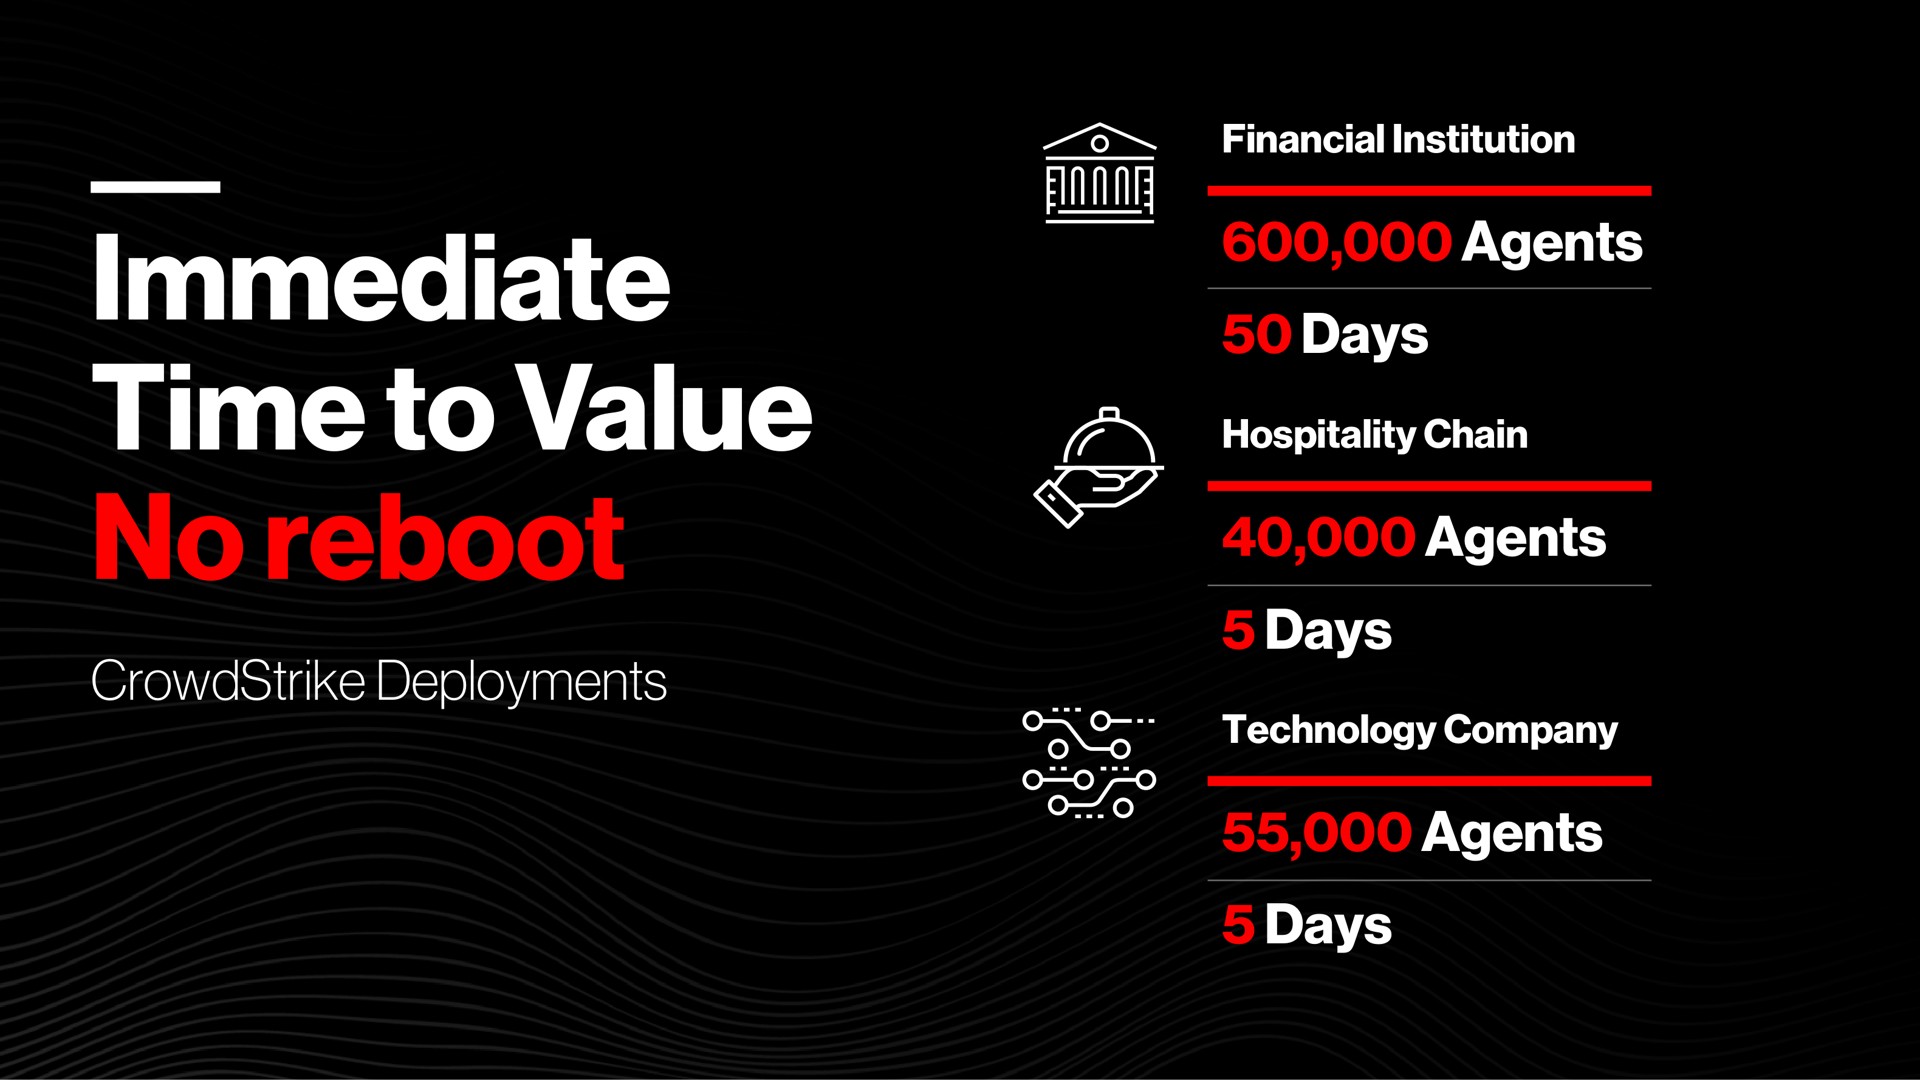 immediate time to value no deployments financial institution agents days hospitality chain agents days technology company agents days a i flite a aes | Crowdstrike